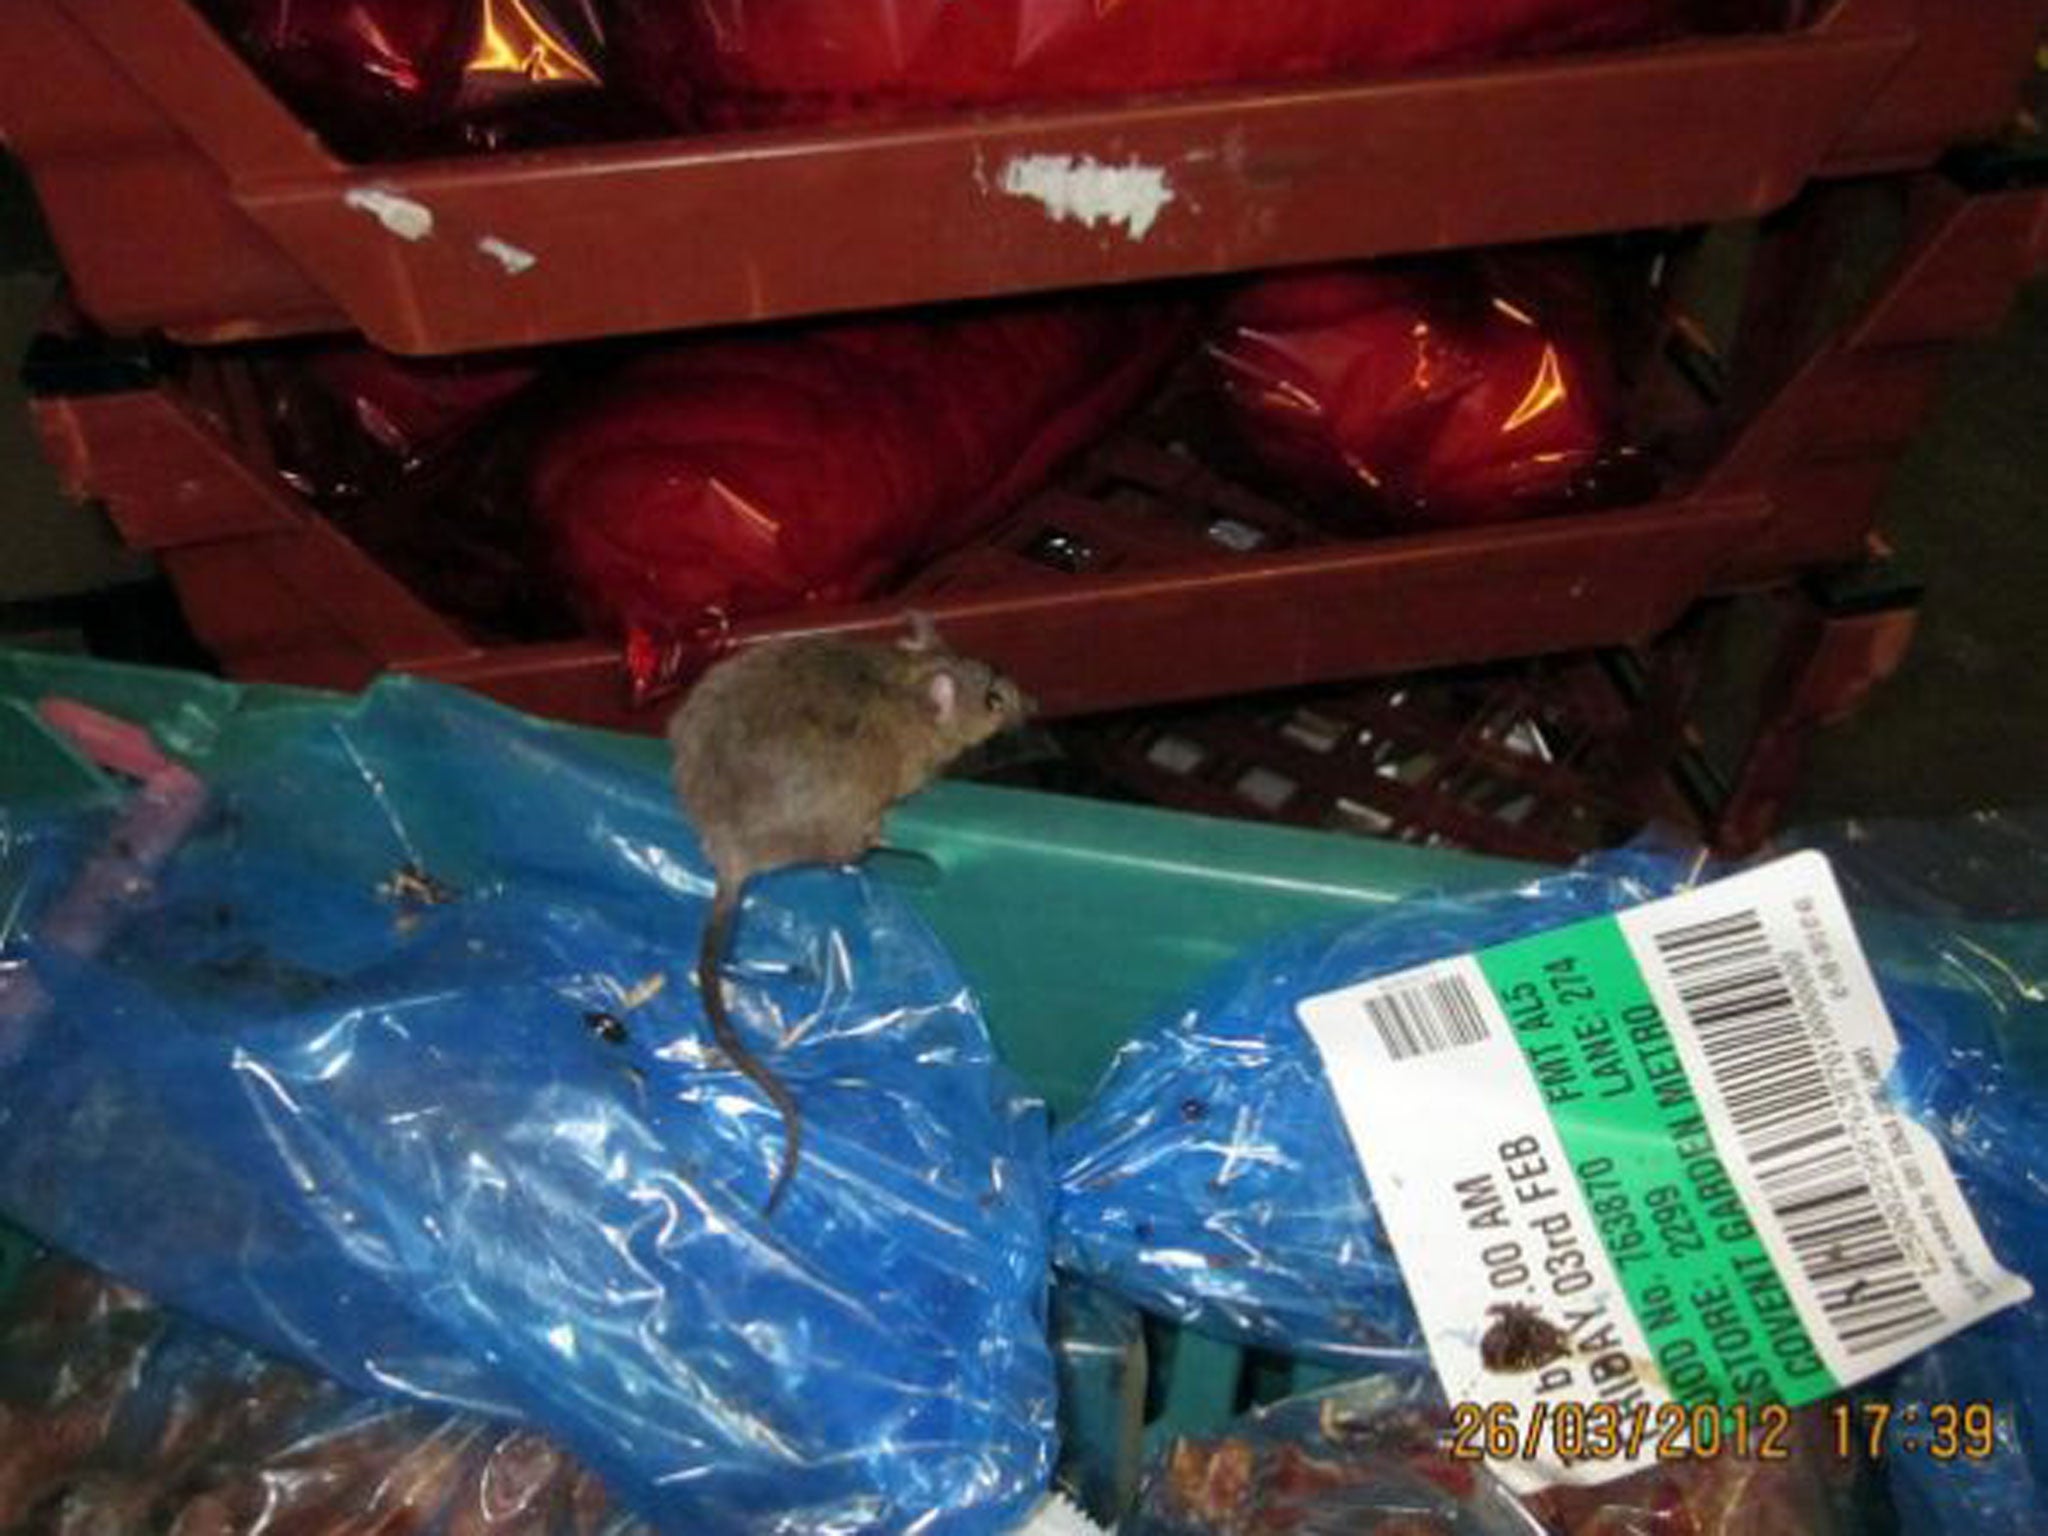 Tesco’s well-fed ‘super mouse’ was nearly double the size of a standard mouse